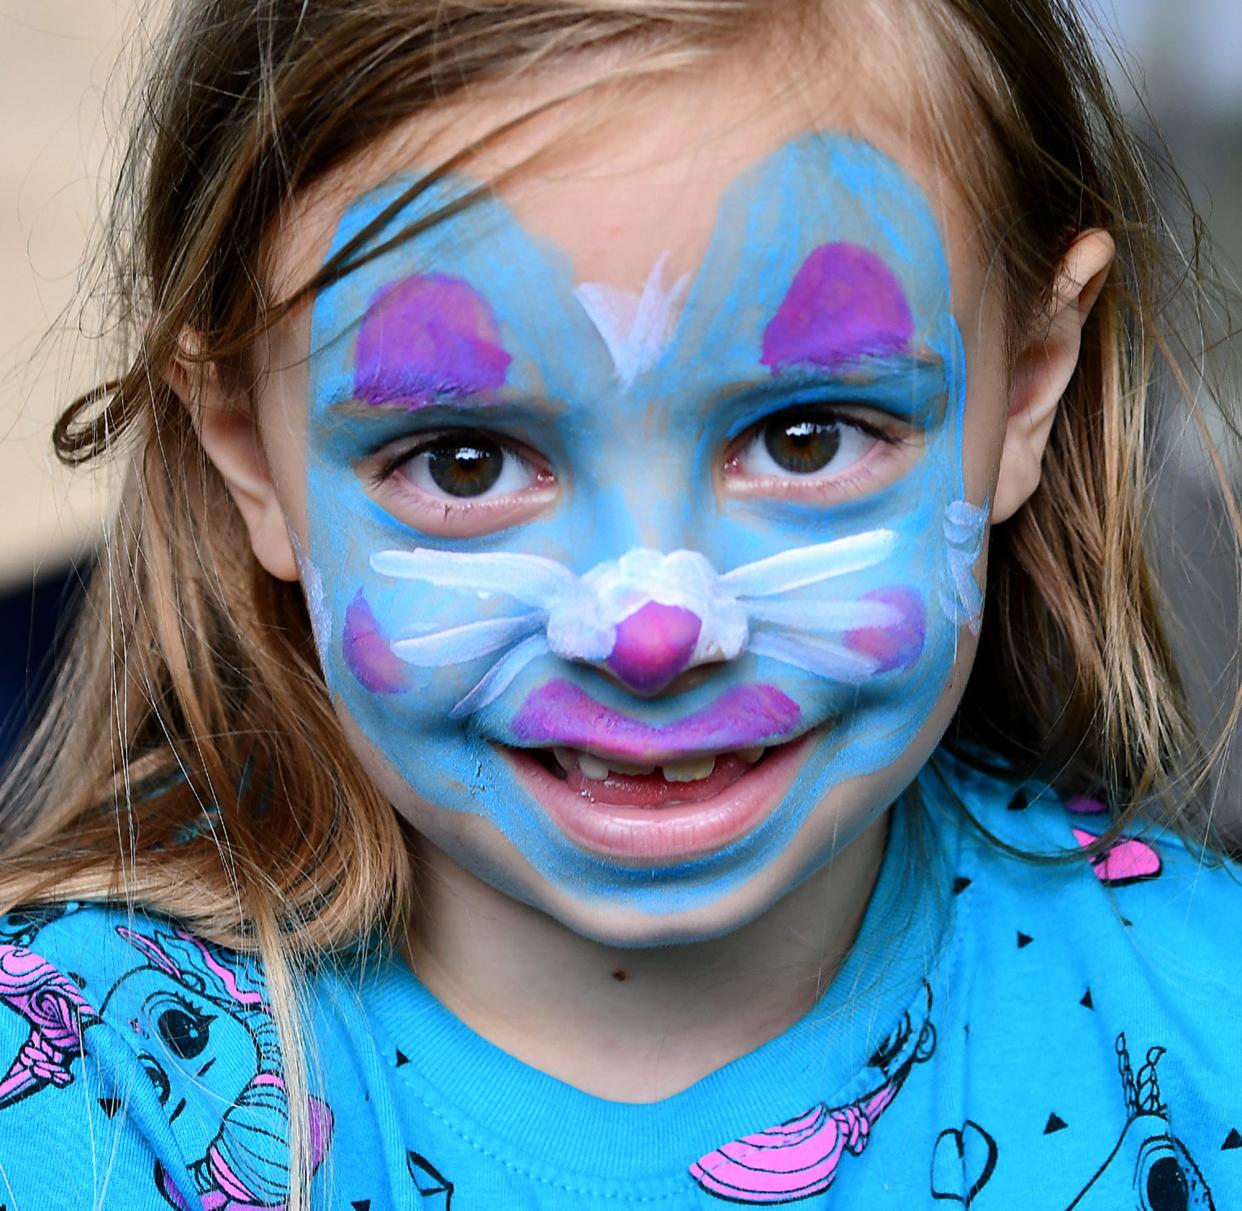 Zoe Herbert, 6, of Grafton, smiles after getting her face painted by Maggie Mussler, 17, to look like a blue bunny at the Apple Tree Arts face painting booth during the Grafton Farmers Market at the Grafton Municipal Town Building on 30 Providence Road.